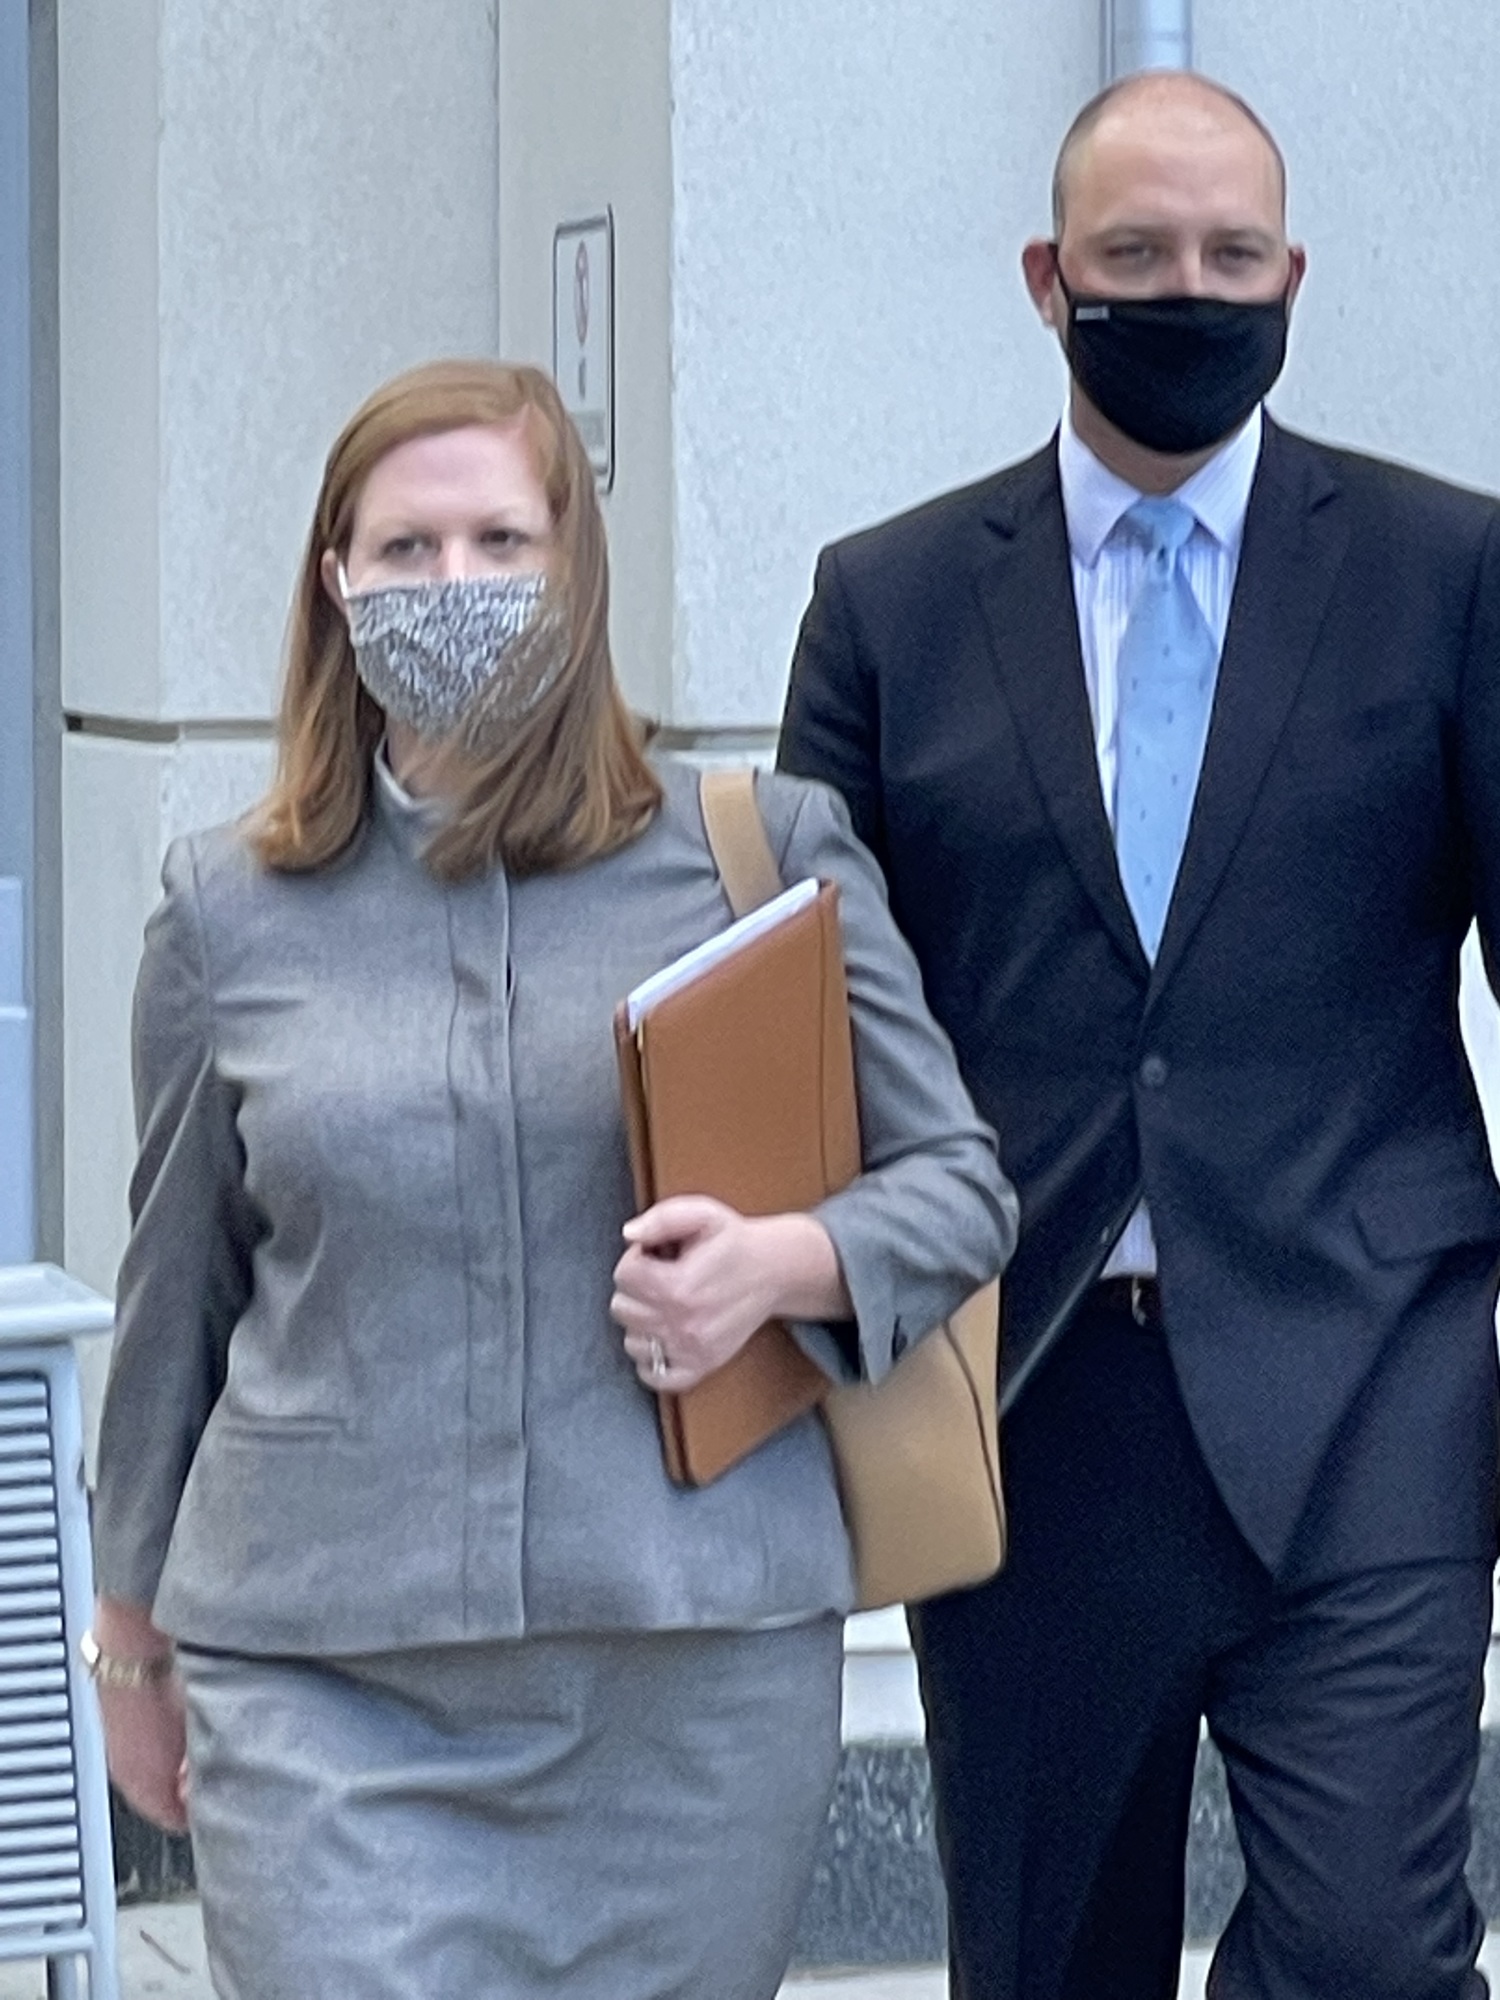 Fired JEA Chief Financial Officer Ryan Wannemacher leaves the federal courthouse Downtown on March 8 with his attorney Catherine M. Licandro after pleading not guilty to federal charges.